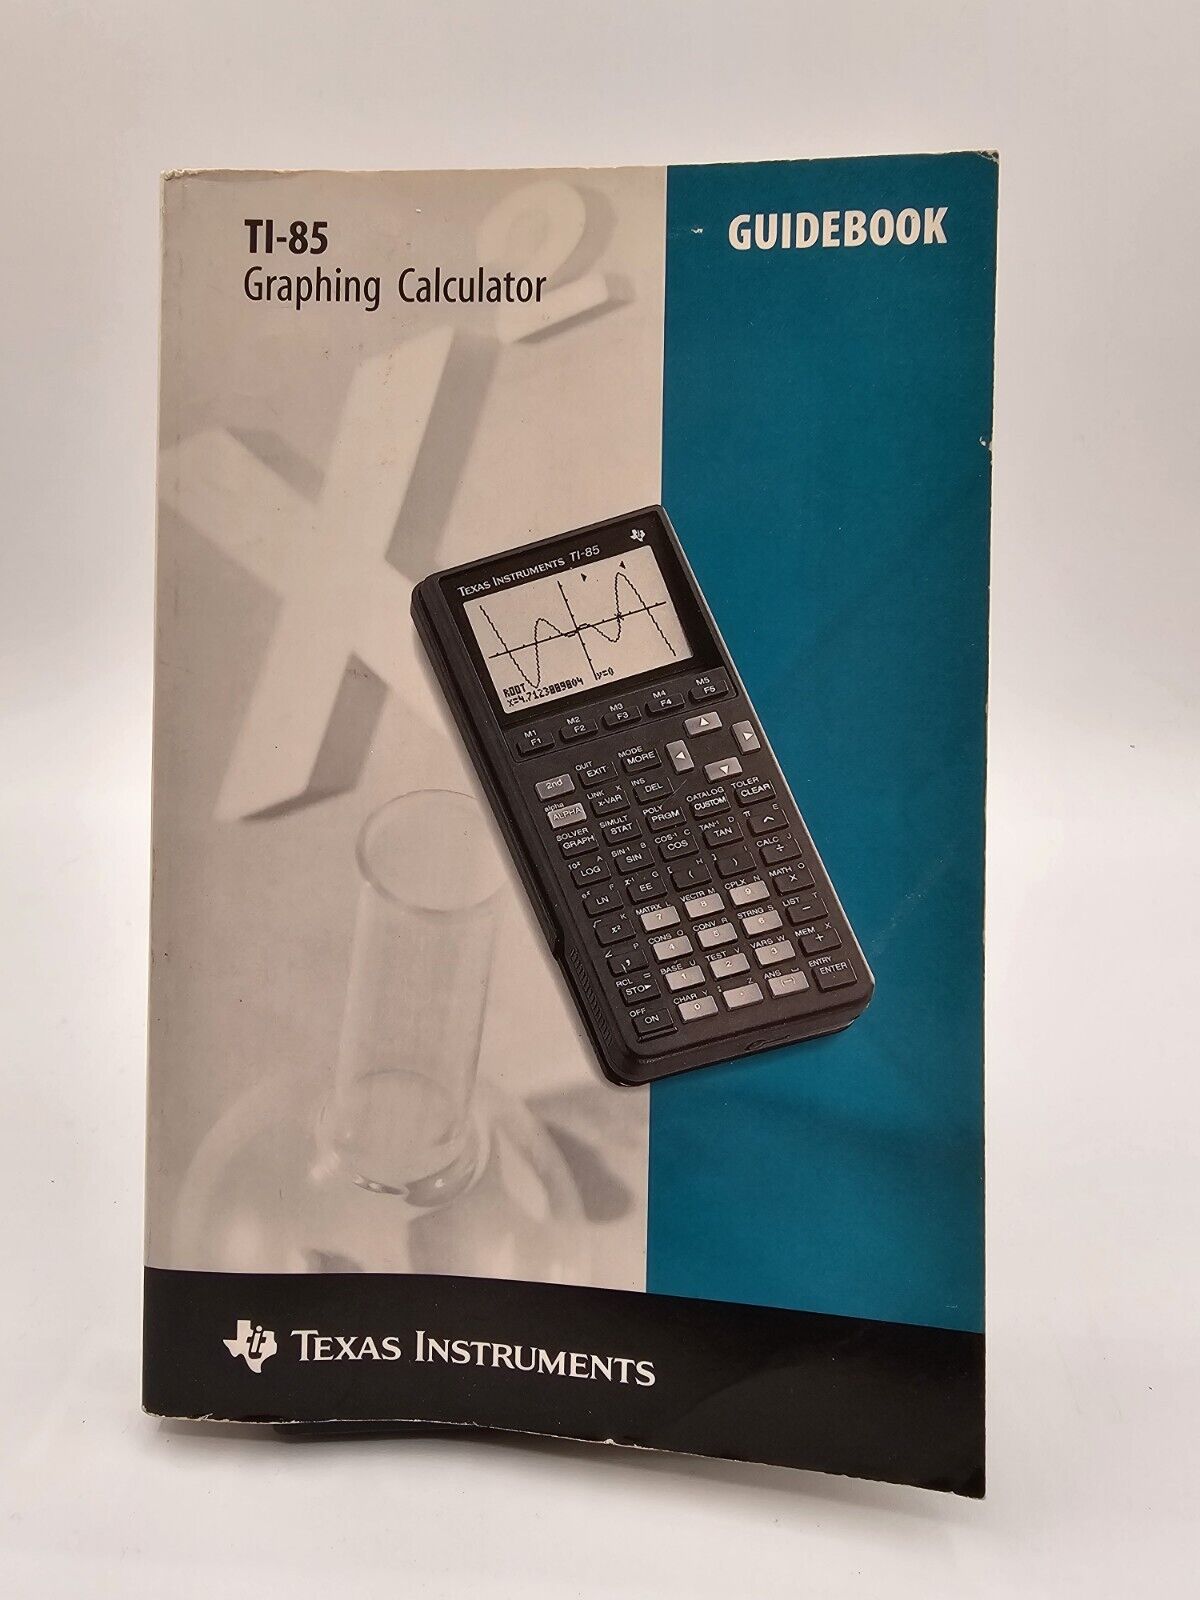 Texas Instruments TI-85 Graphing Calculator Guidebook Instruction Manual